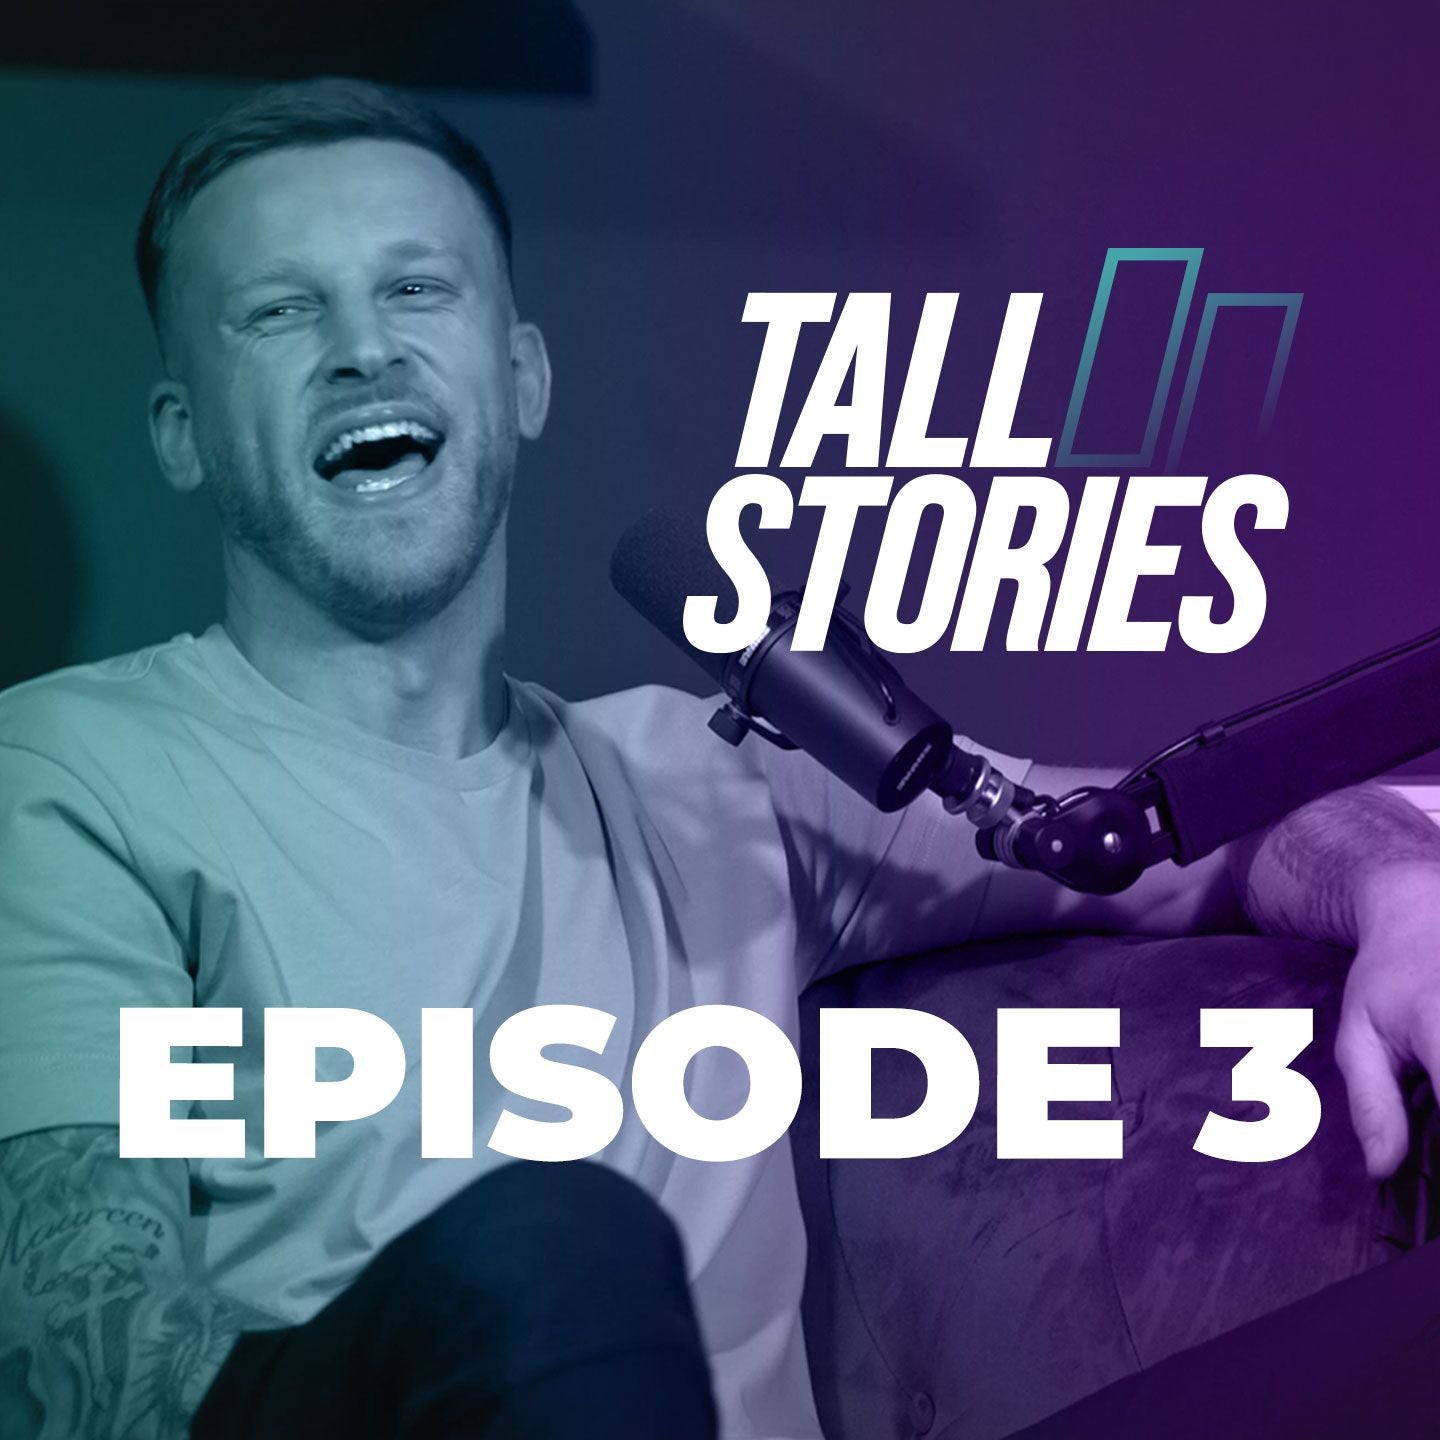 Tall Stories Episode 3